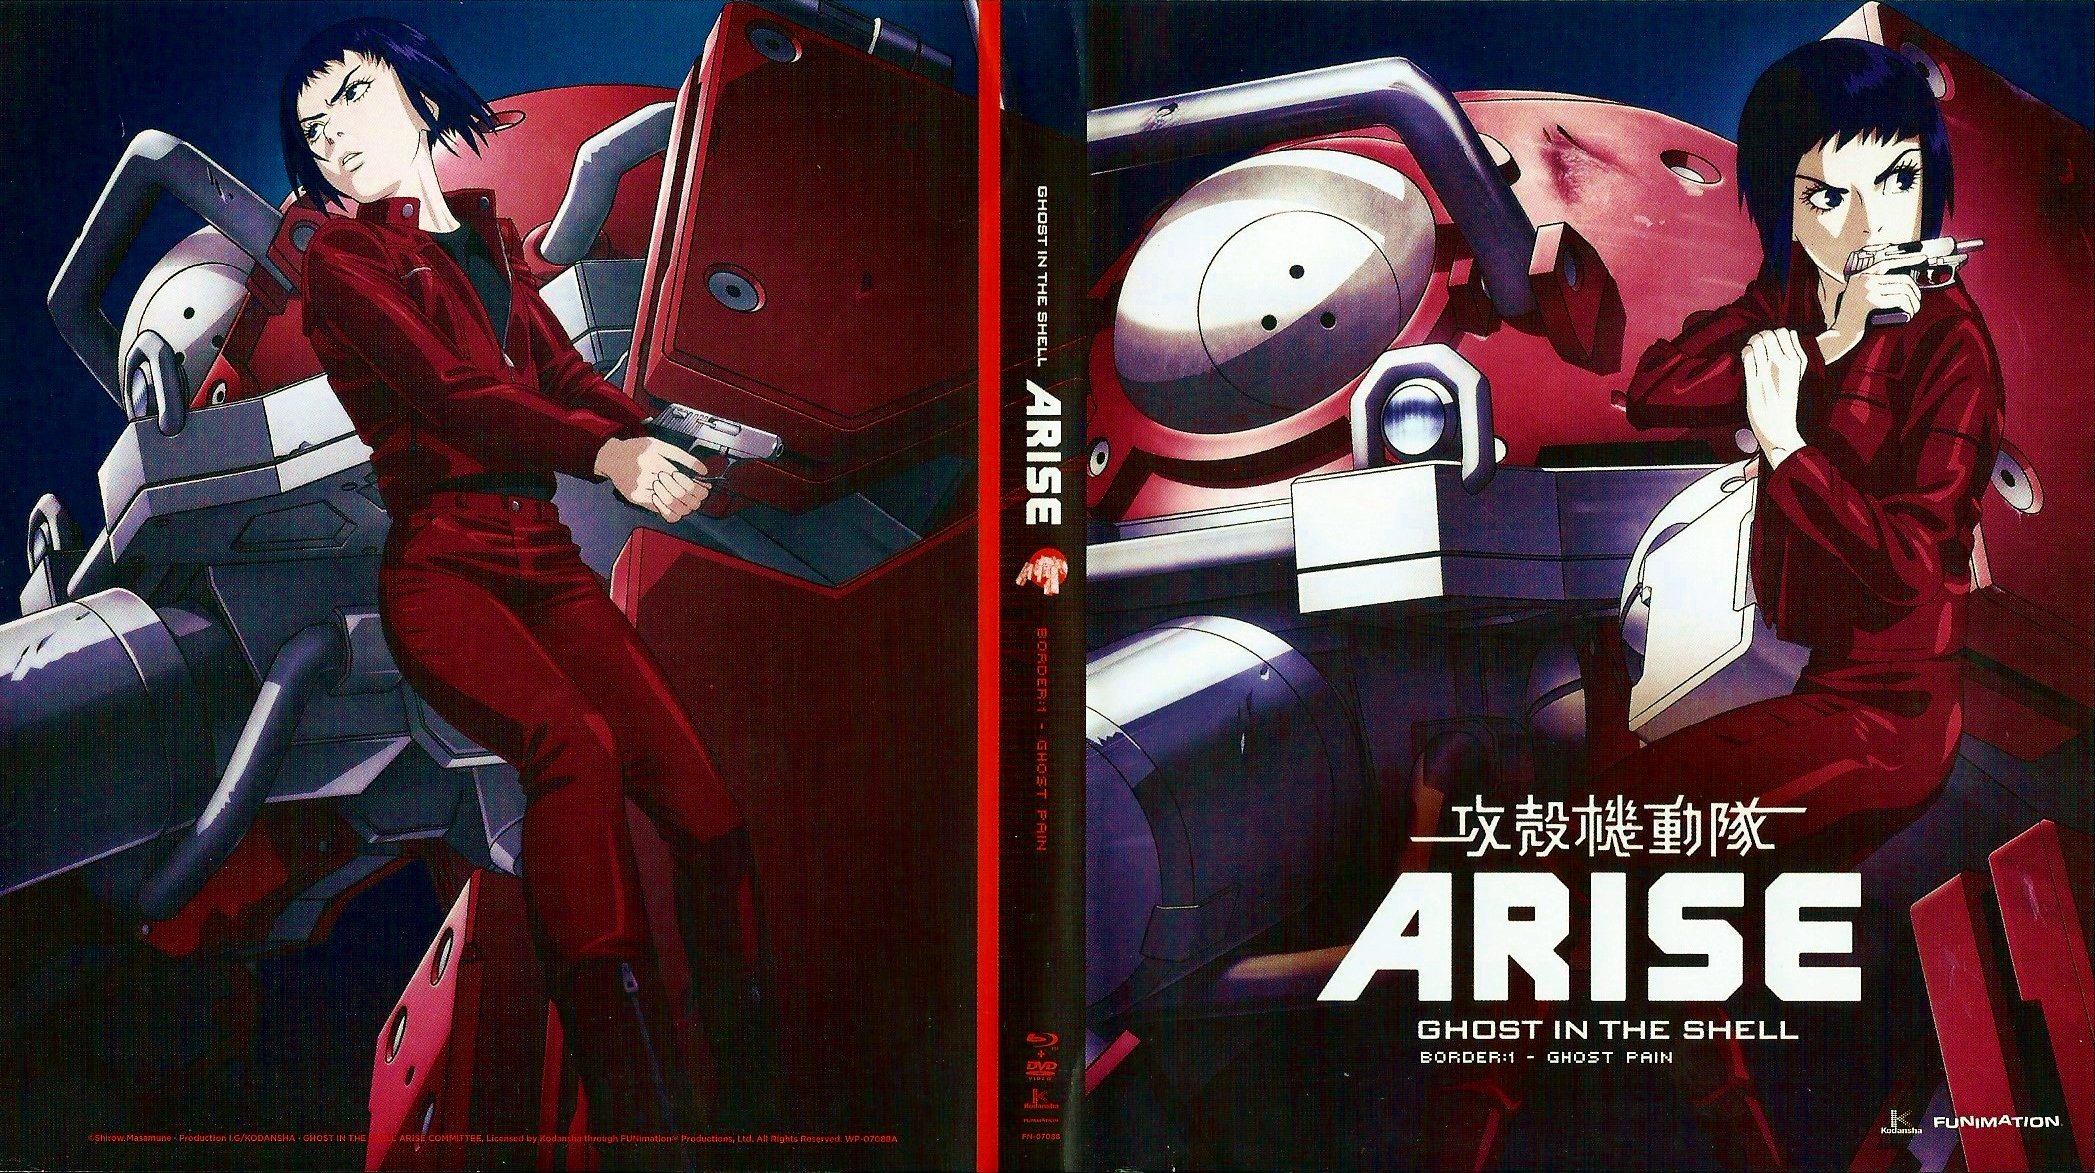 Kazuchika Kise, “Ghost in the Shell: Arise – Ghost Whispers”, Production I.G, 30 novembre 2013